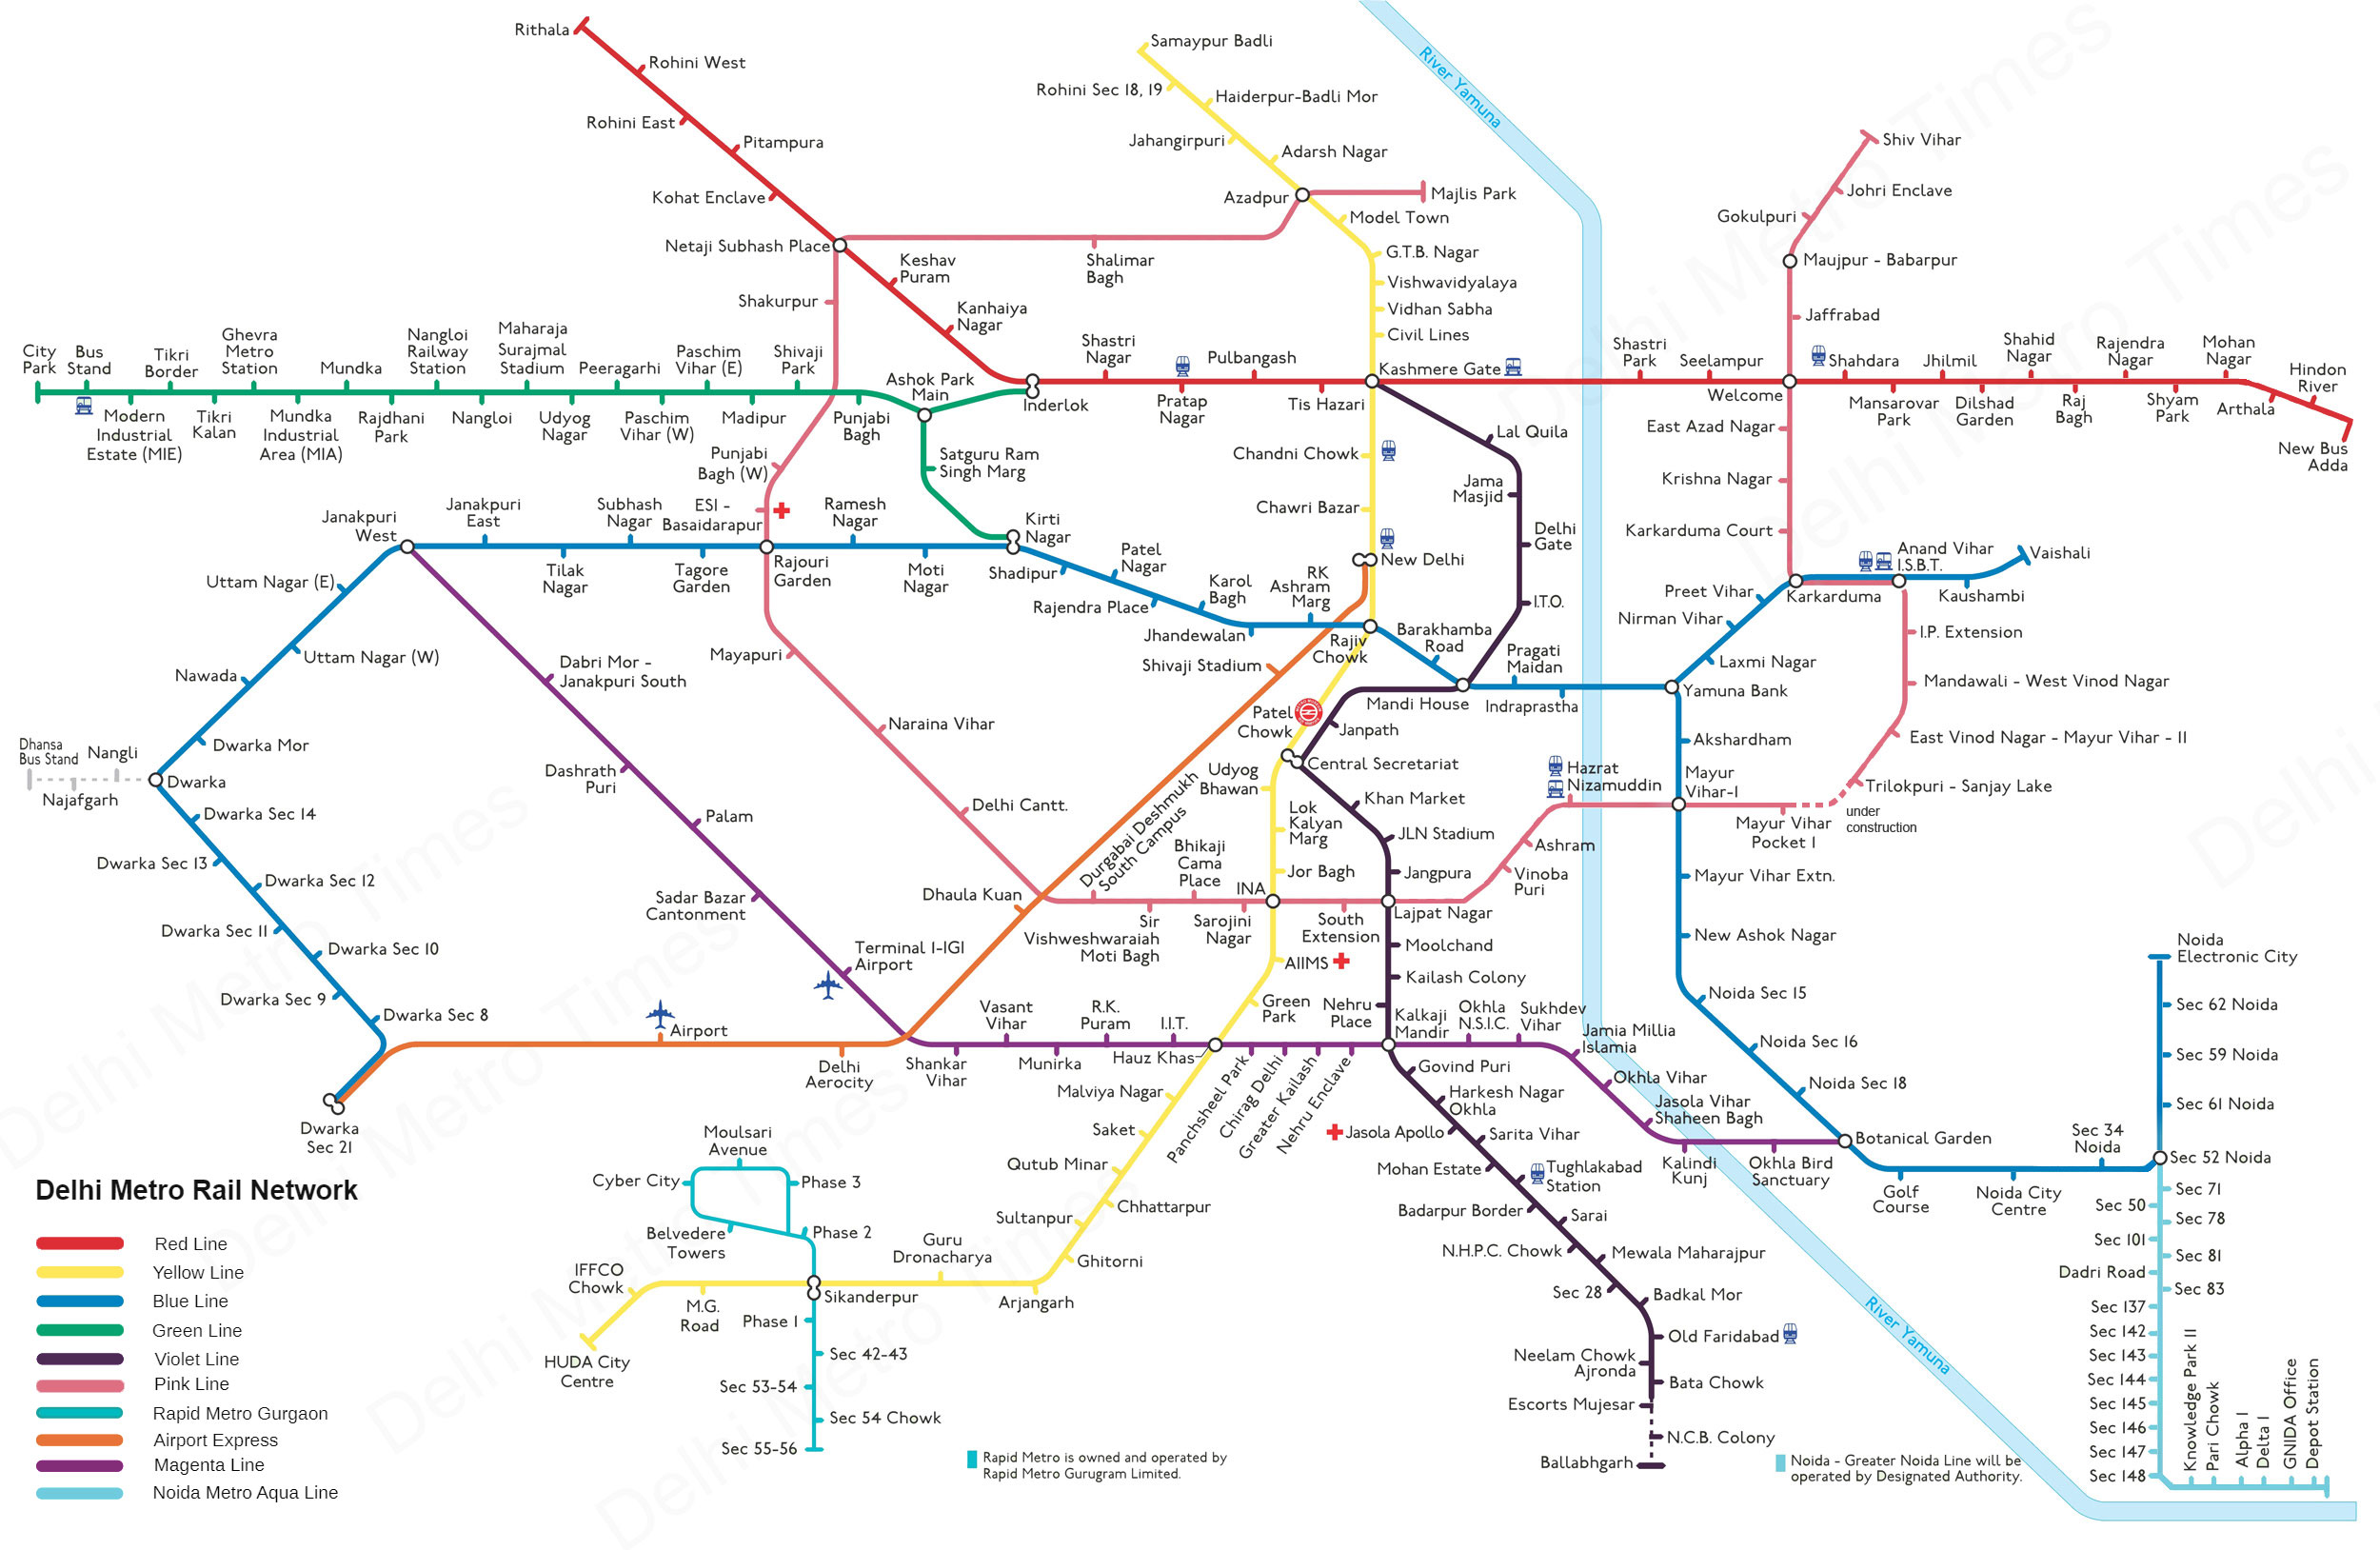 Pitampura Metro Station Map Delhi Metro Pink Line: Hd Route Map, Fare, Stations, Timings, Latest News